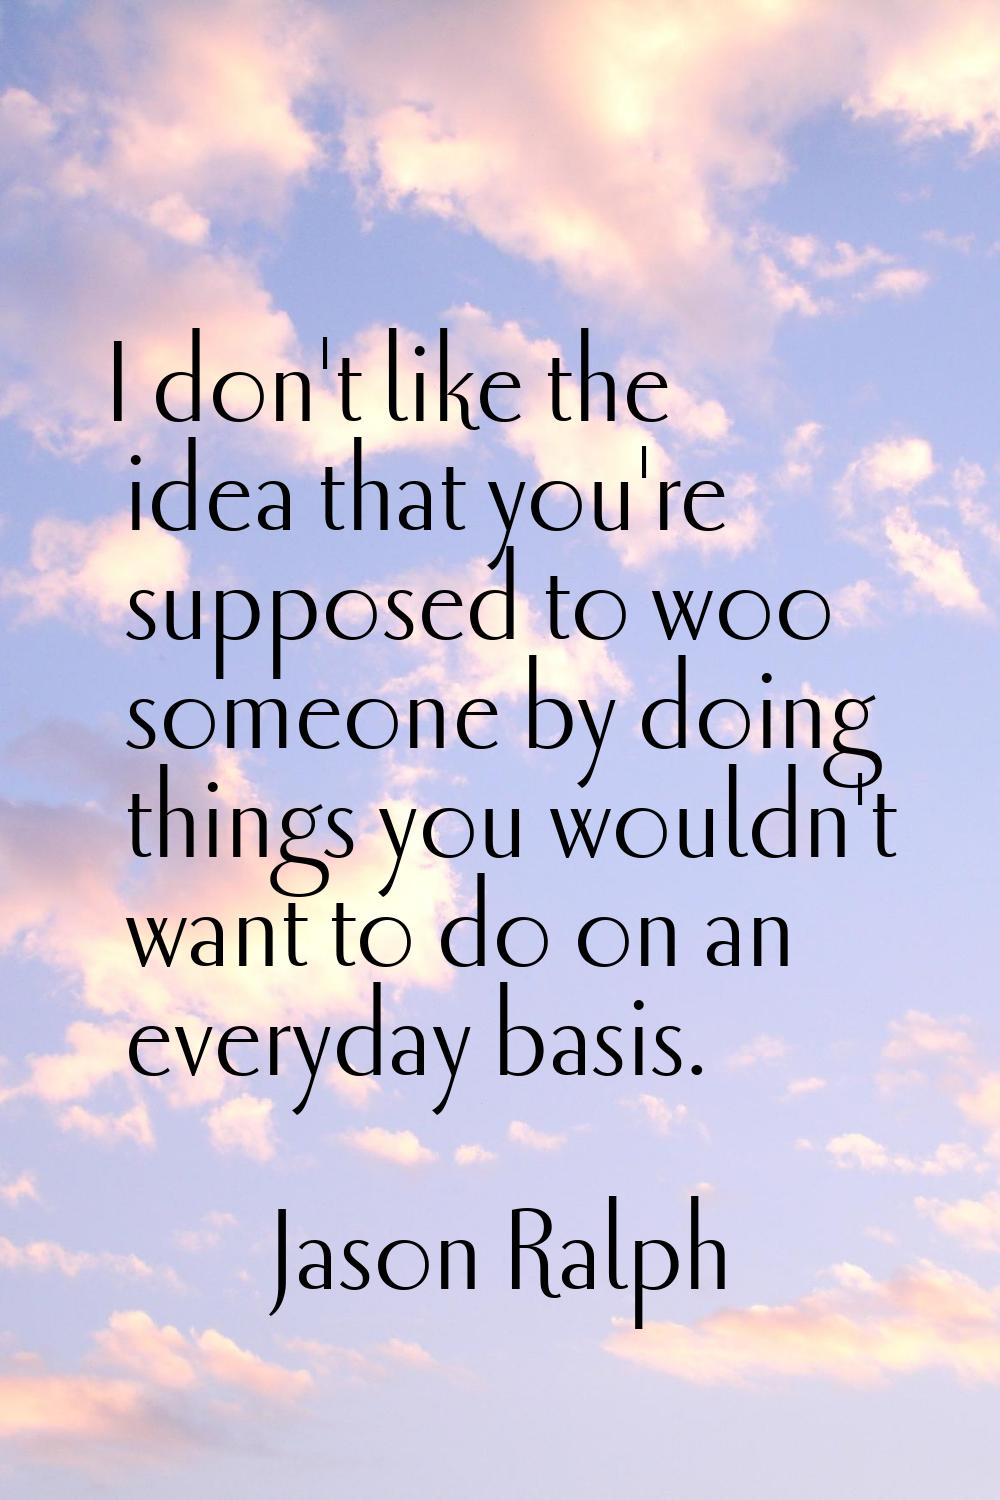 I don't like the idea that you're supposed to woo someone by doing things you wouldn't want to do o